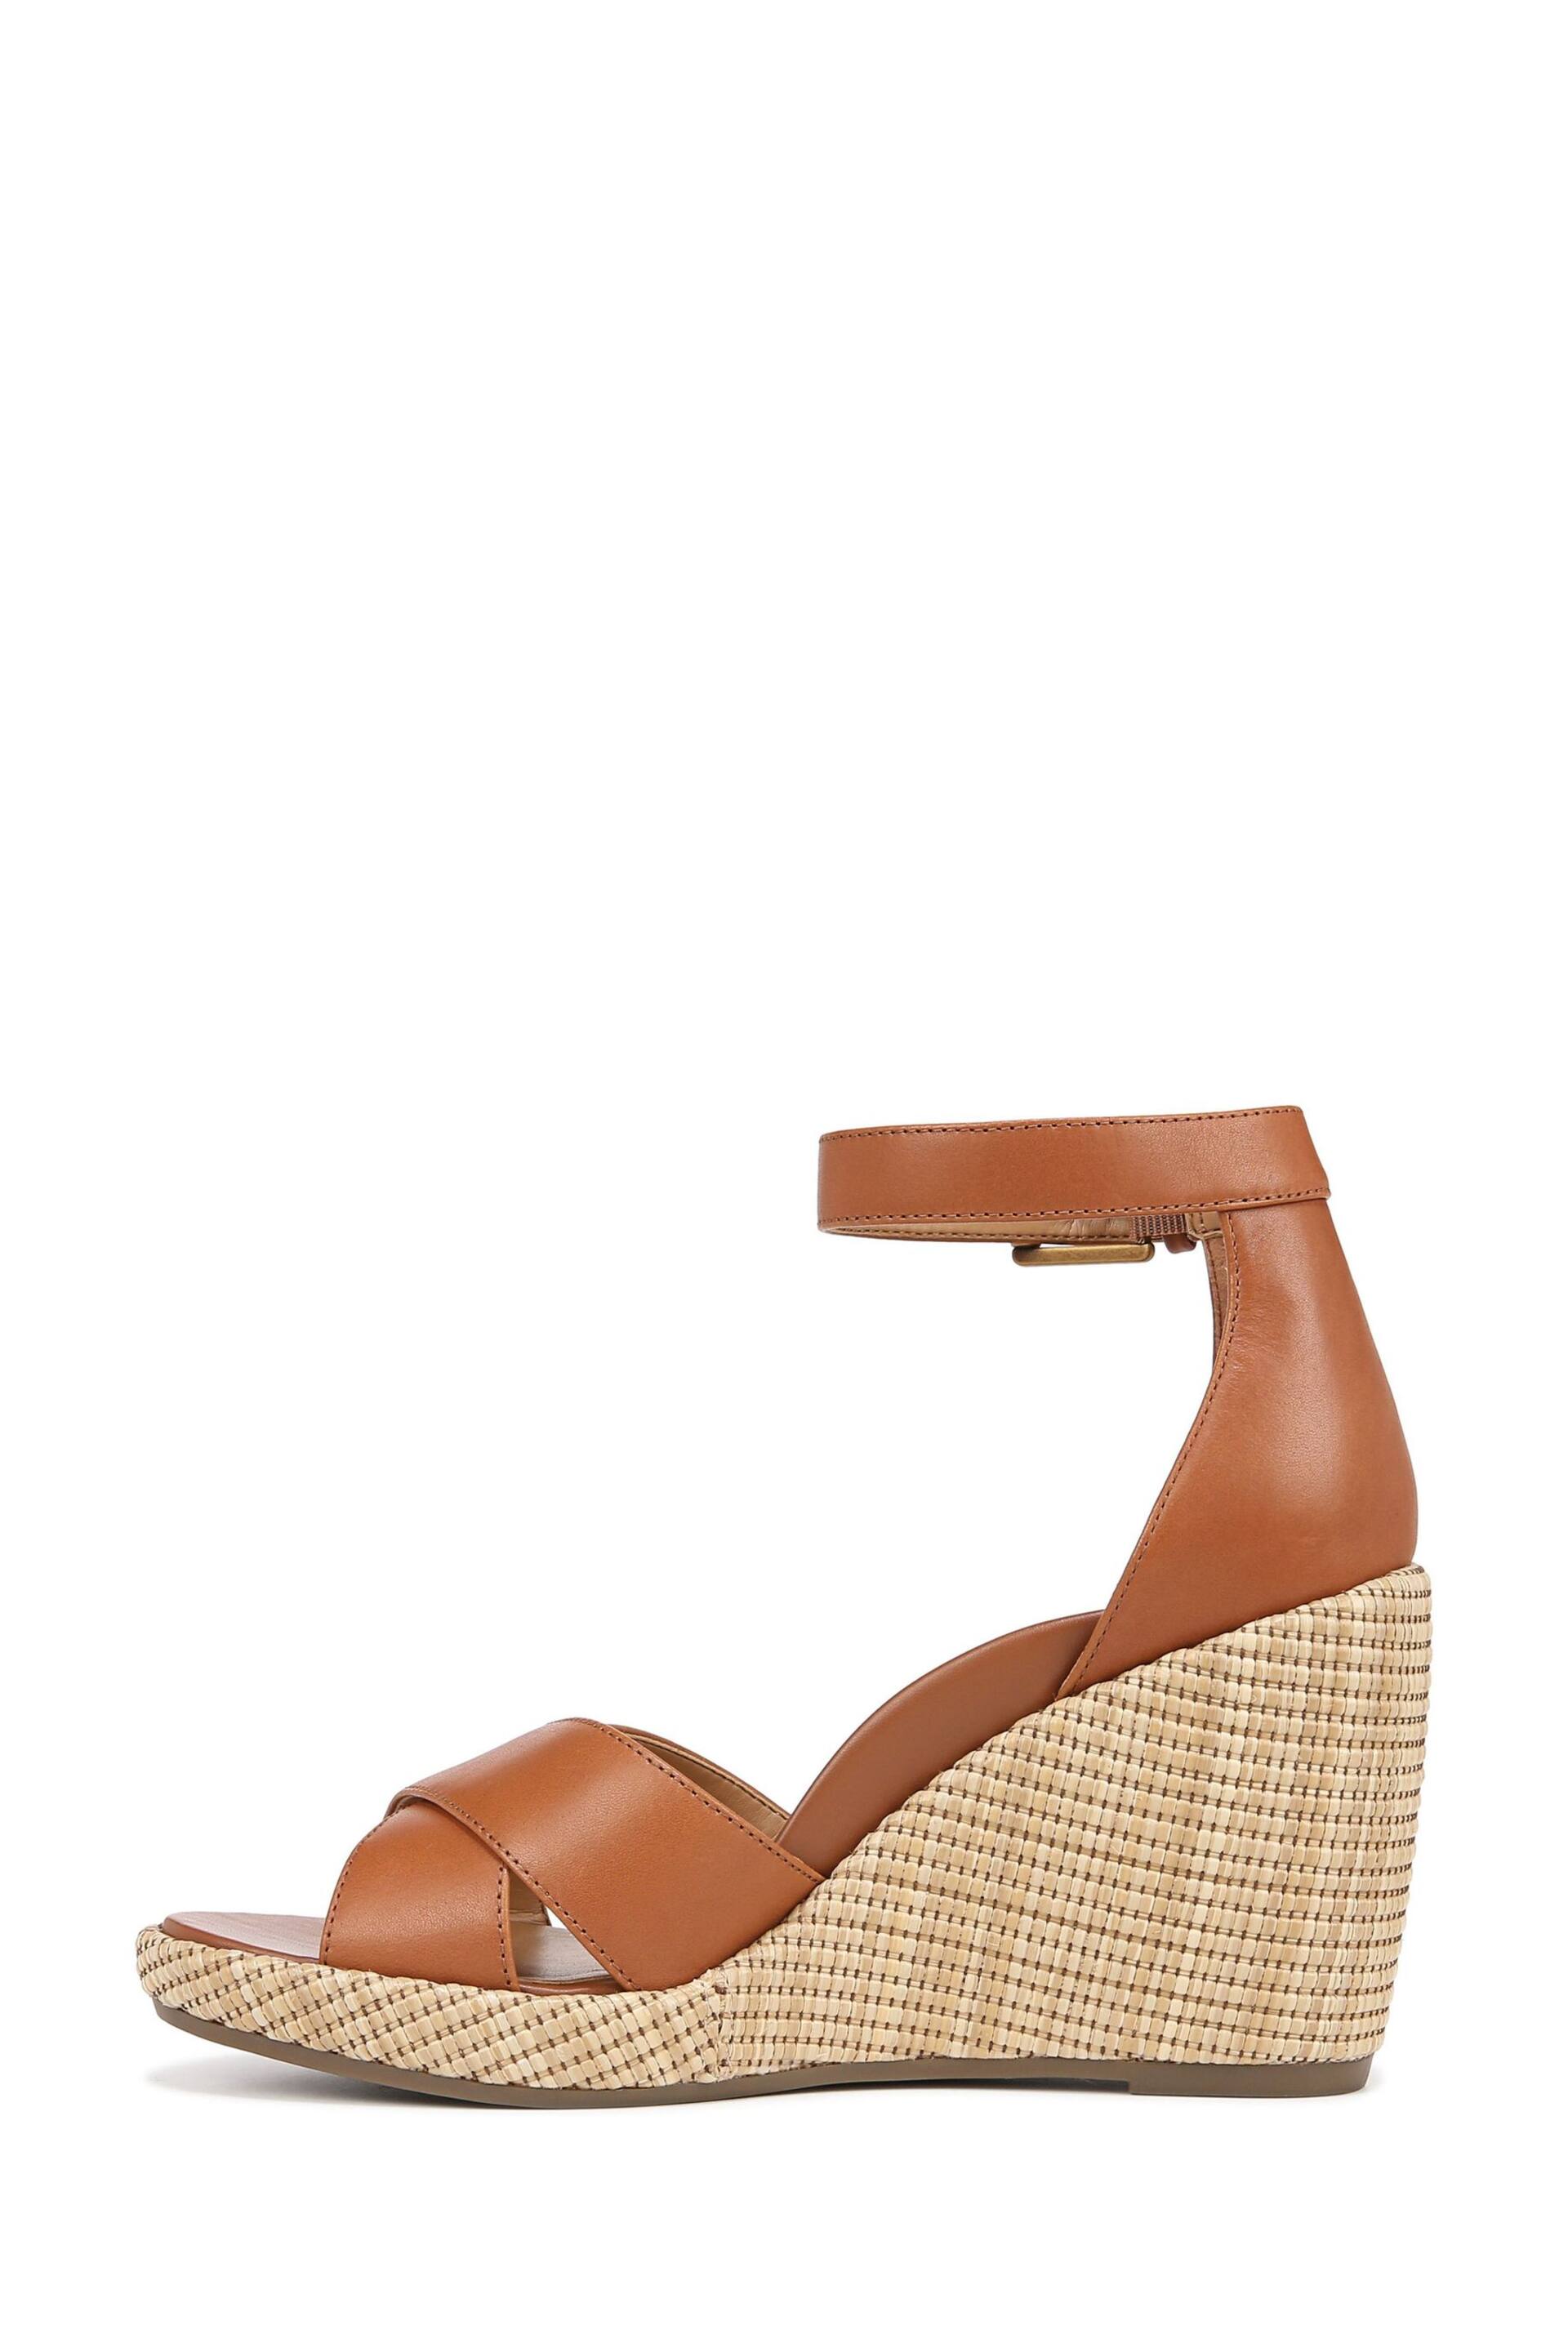 Vionic Marina Ankle Strap Wedge Sandals - Image 2 of 7